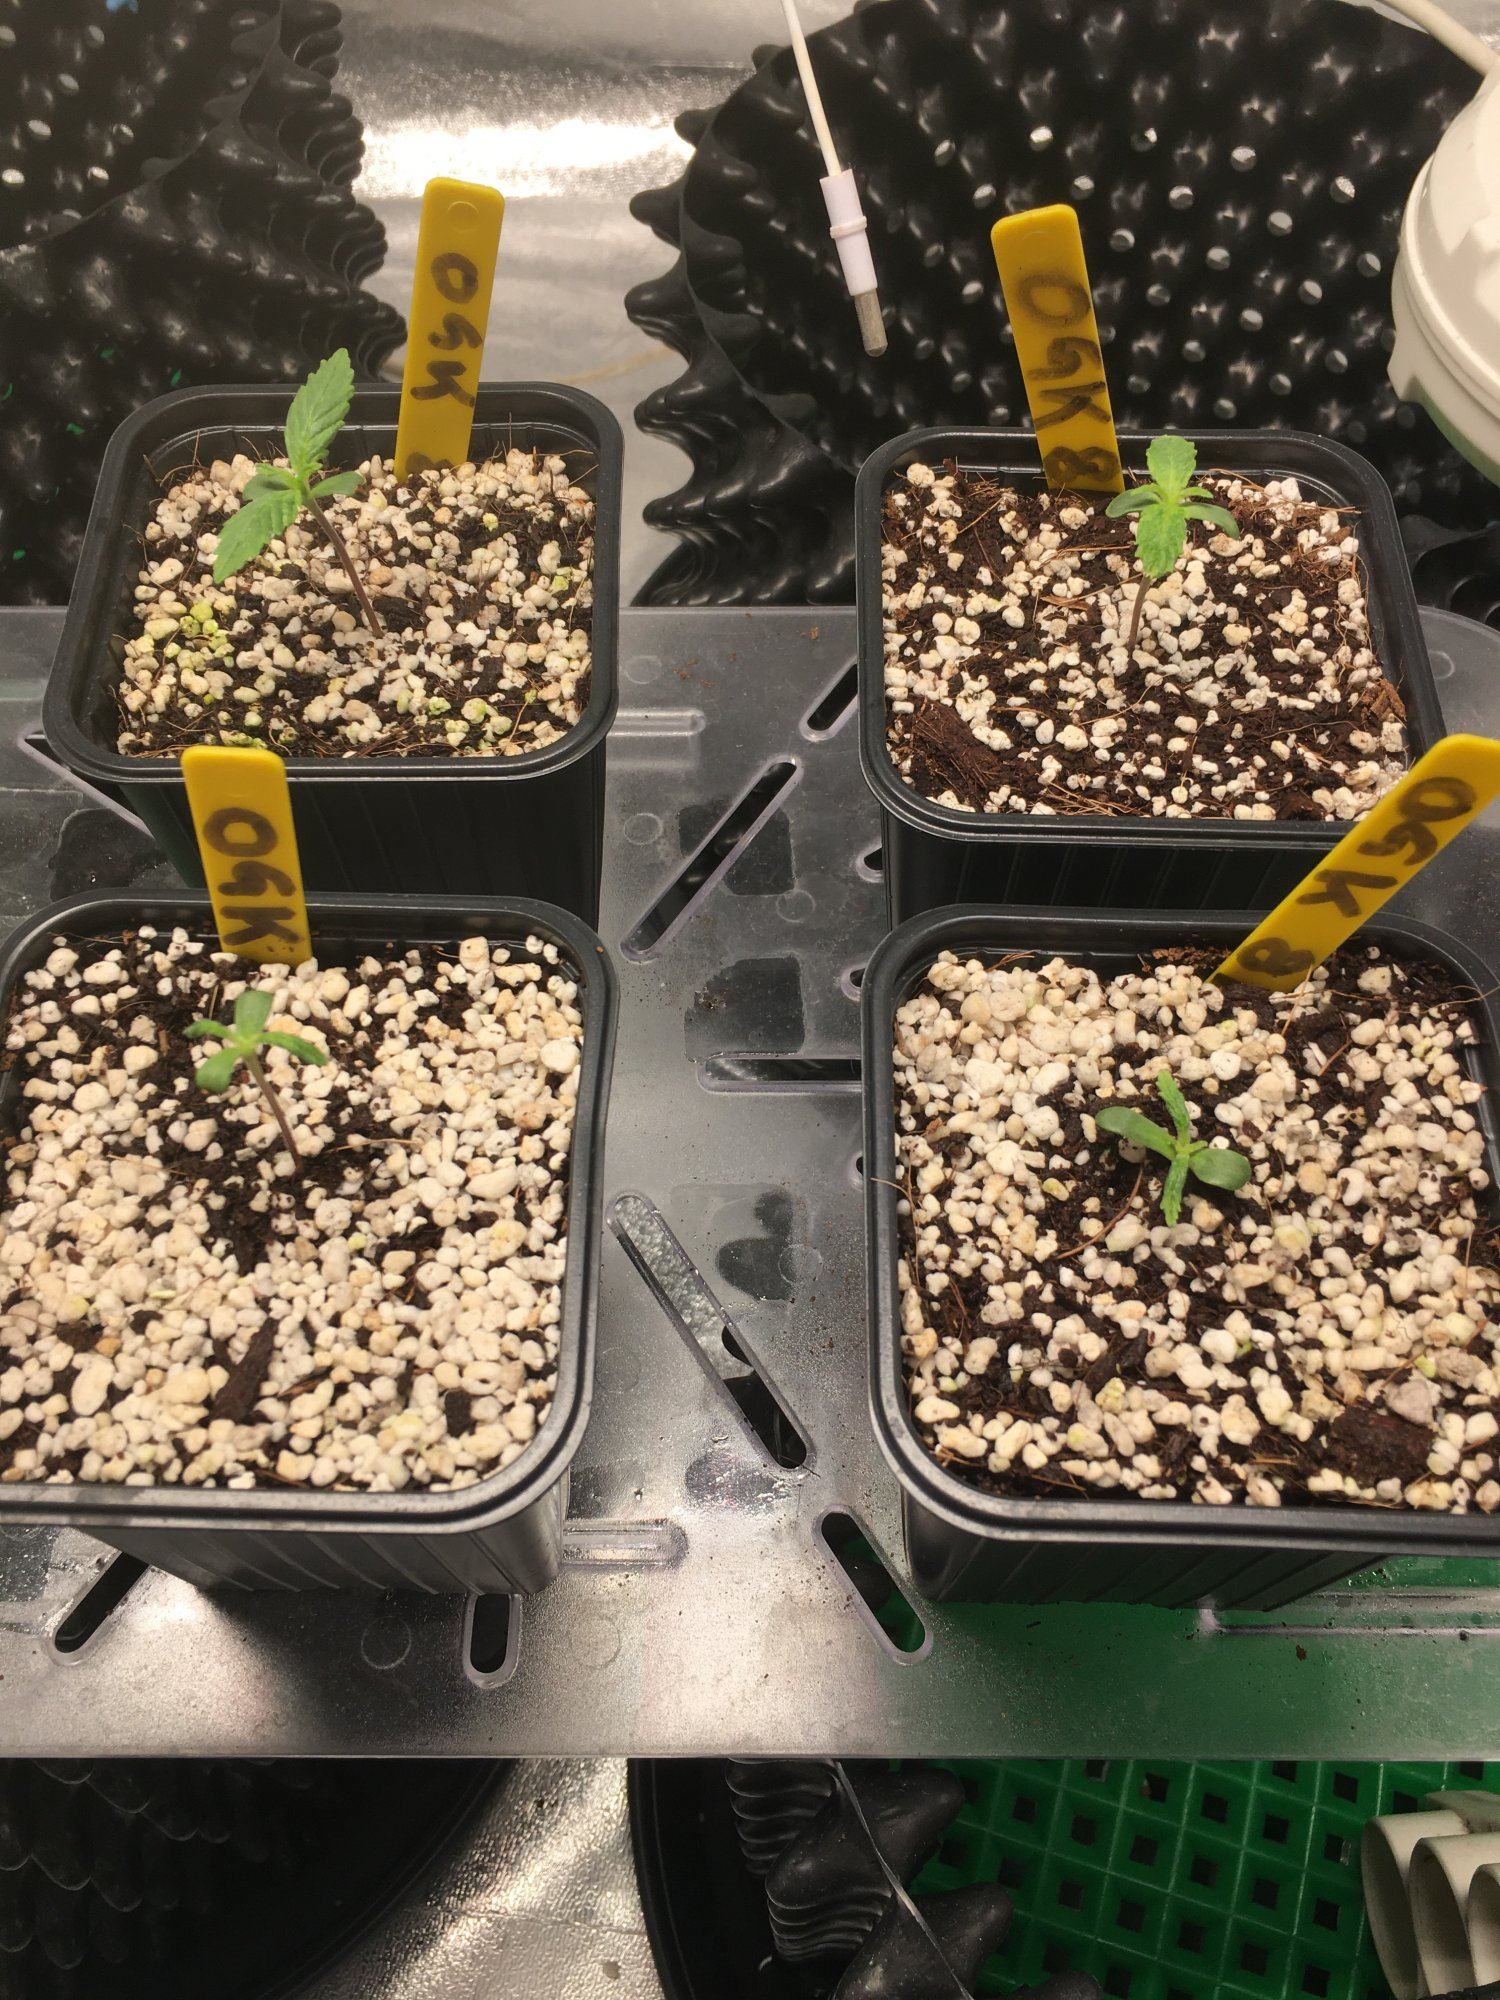 Are there any hope for two of my seedlings photos